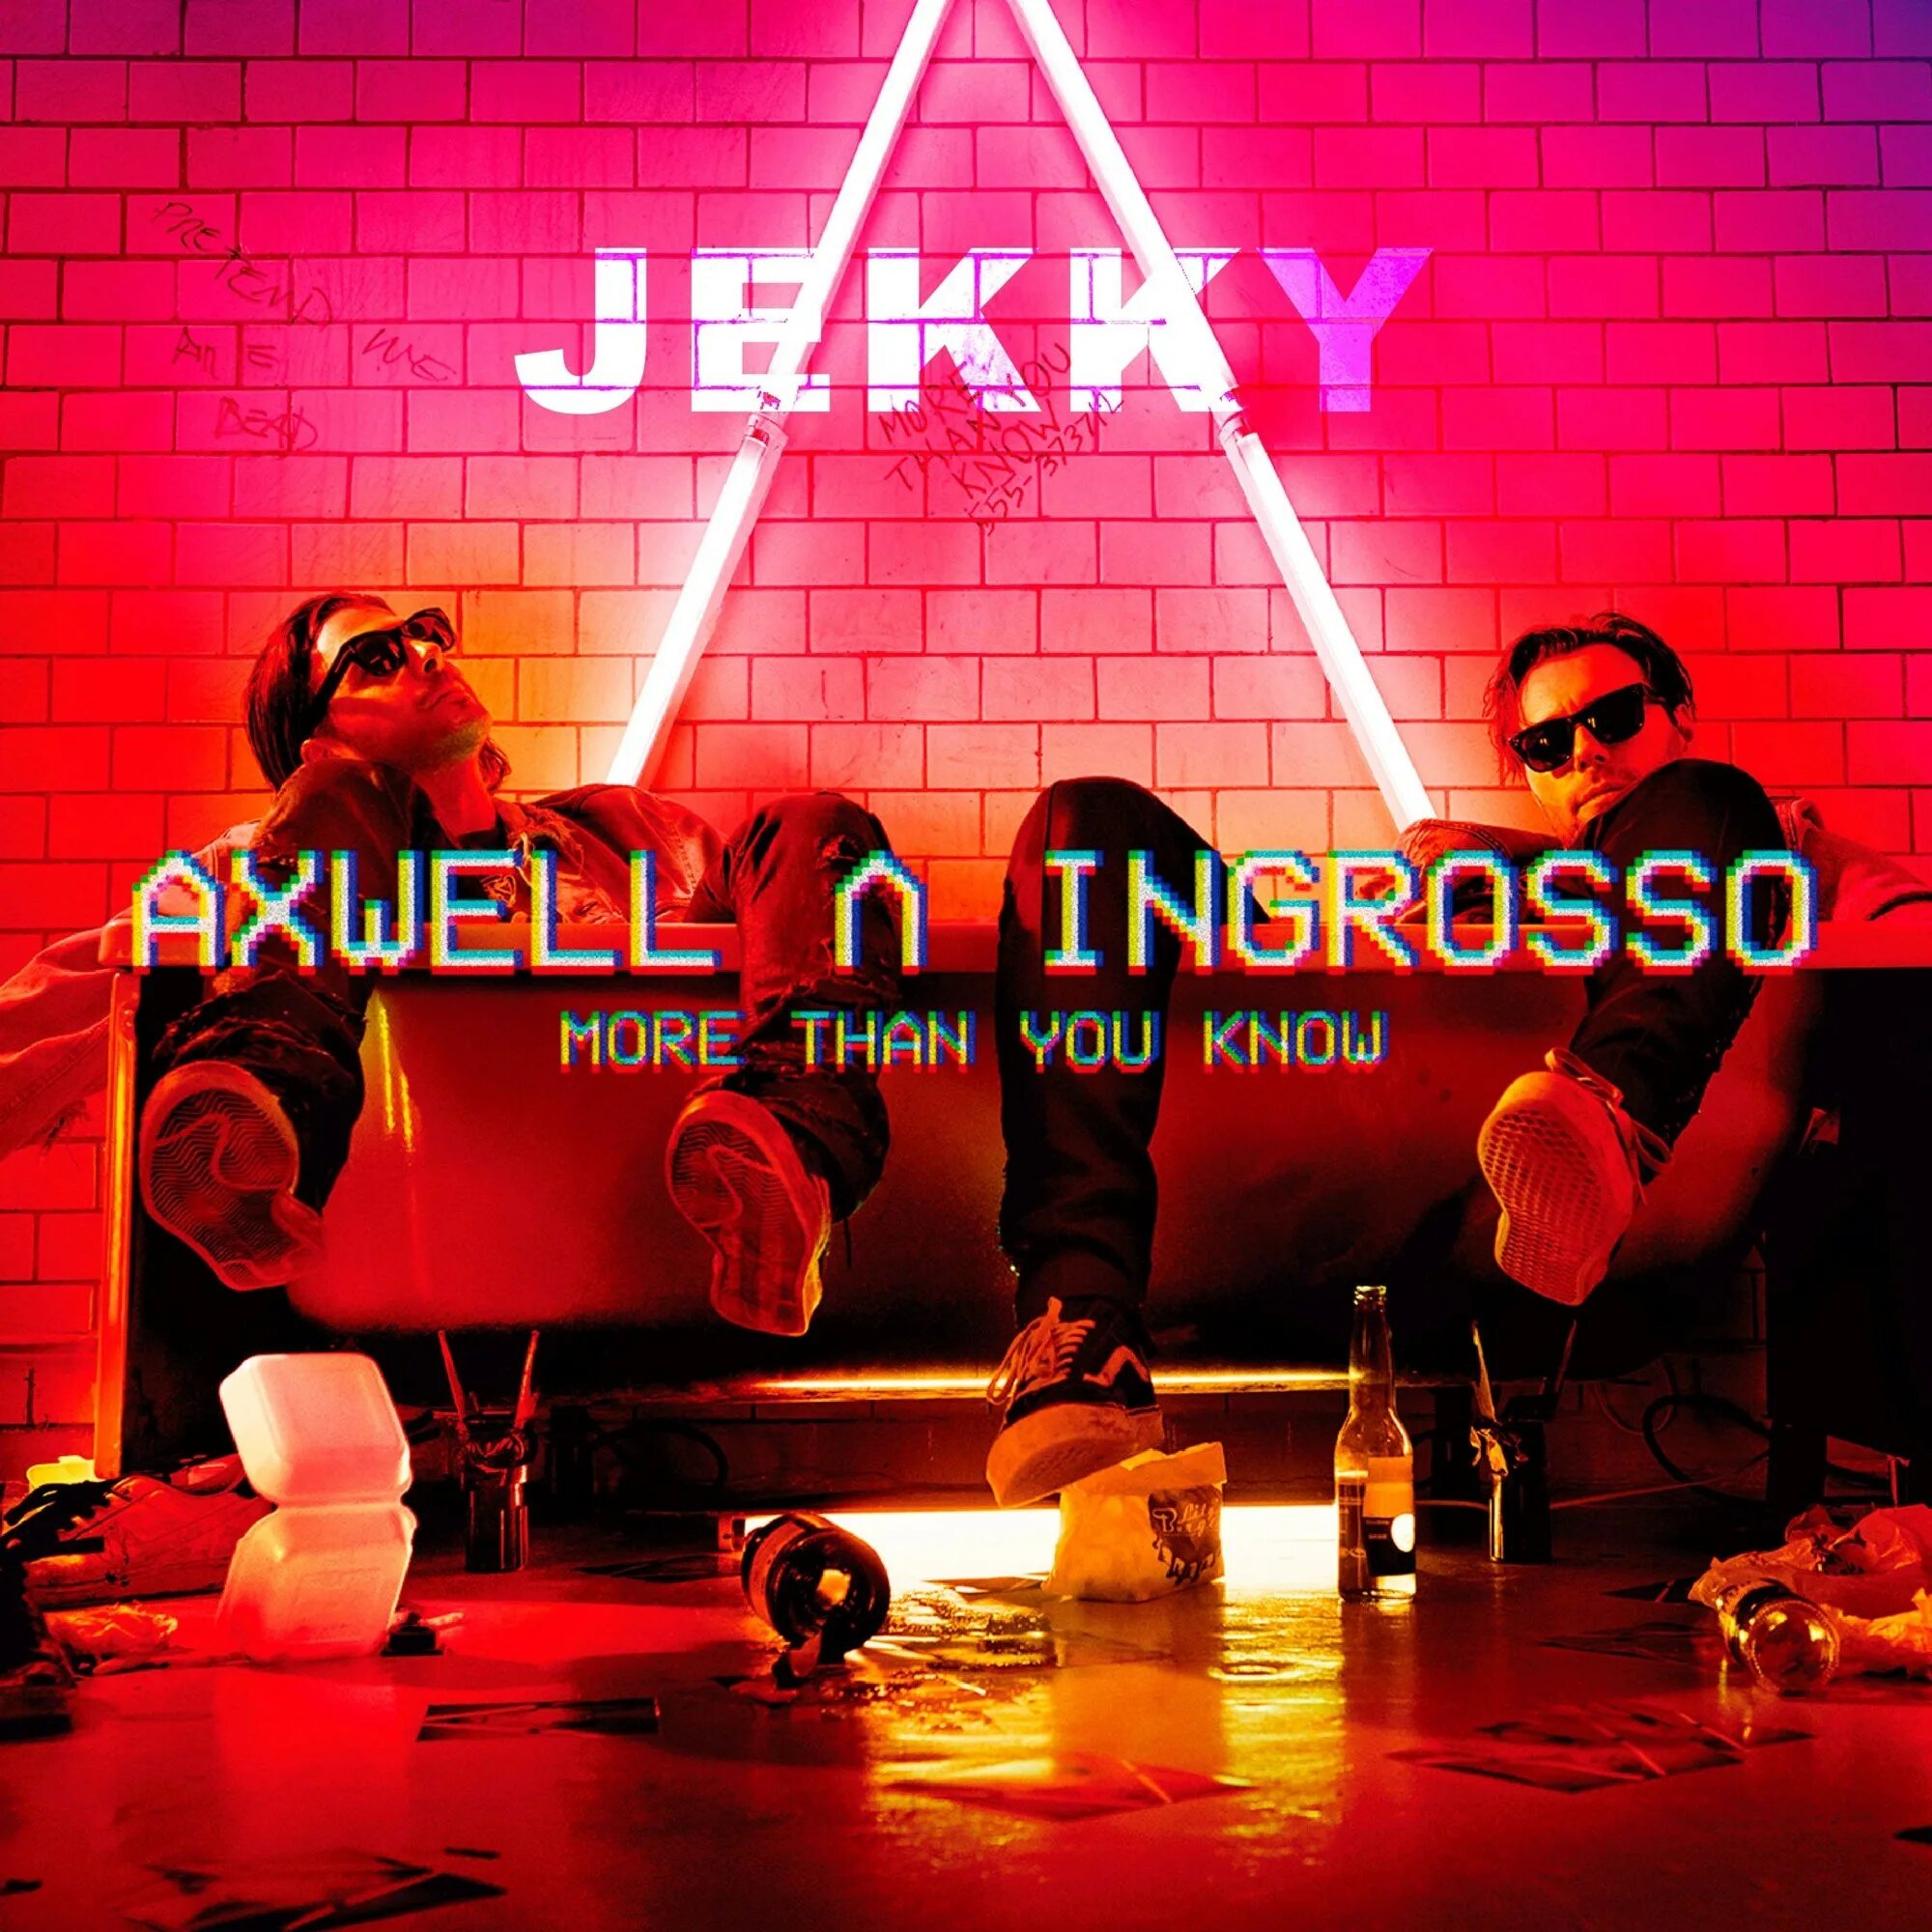 More than you know Себастьян Ингроссо. More than you know Axwell ingrosso. More than you know Axwell ingrosso обложка. Axwell ingrosso обложка. Axwell more than you